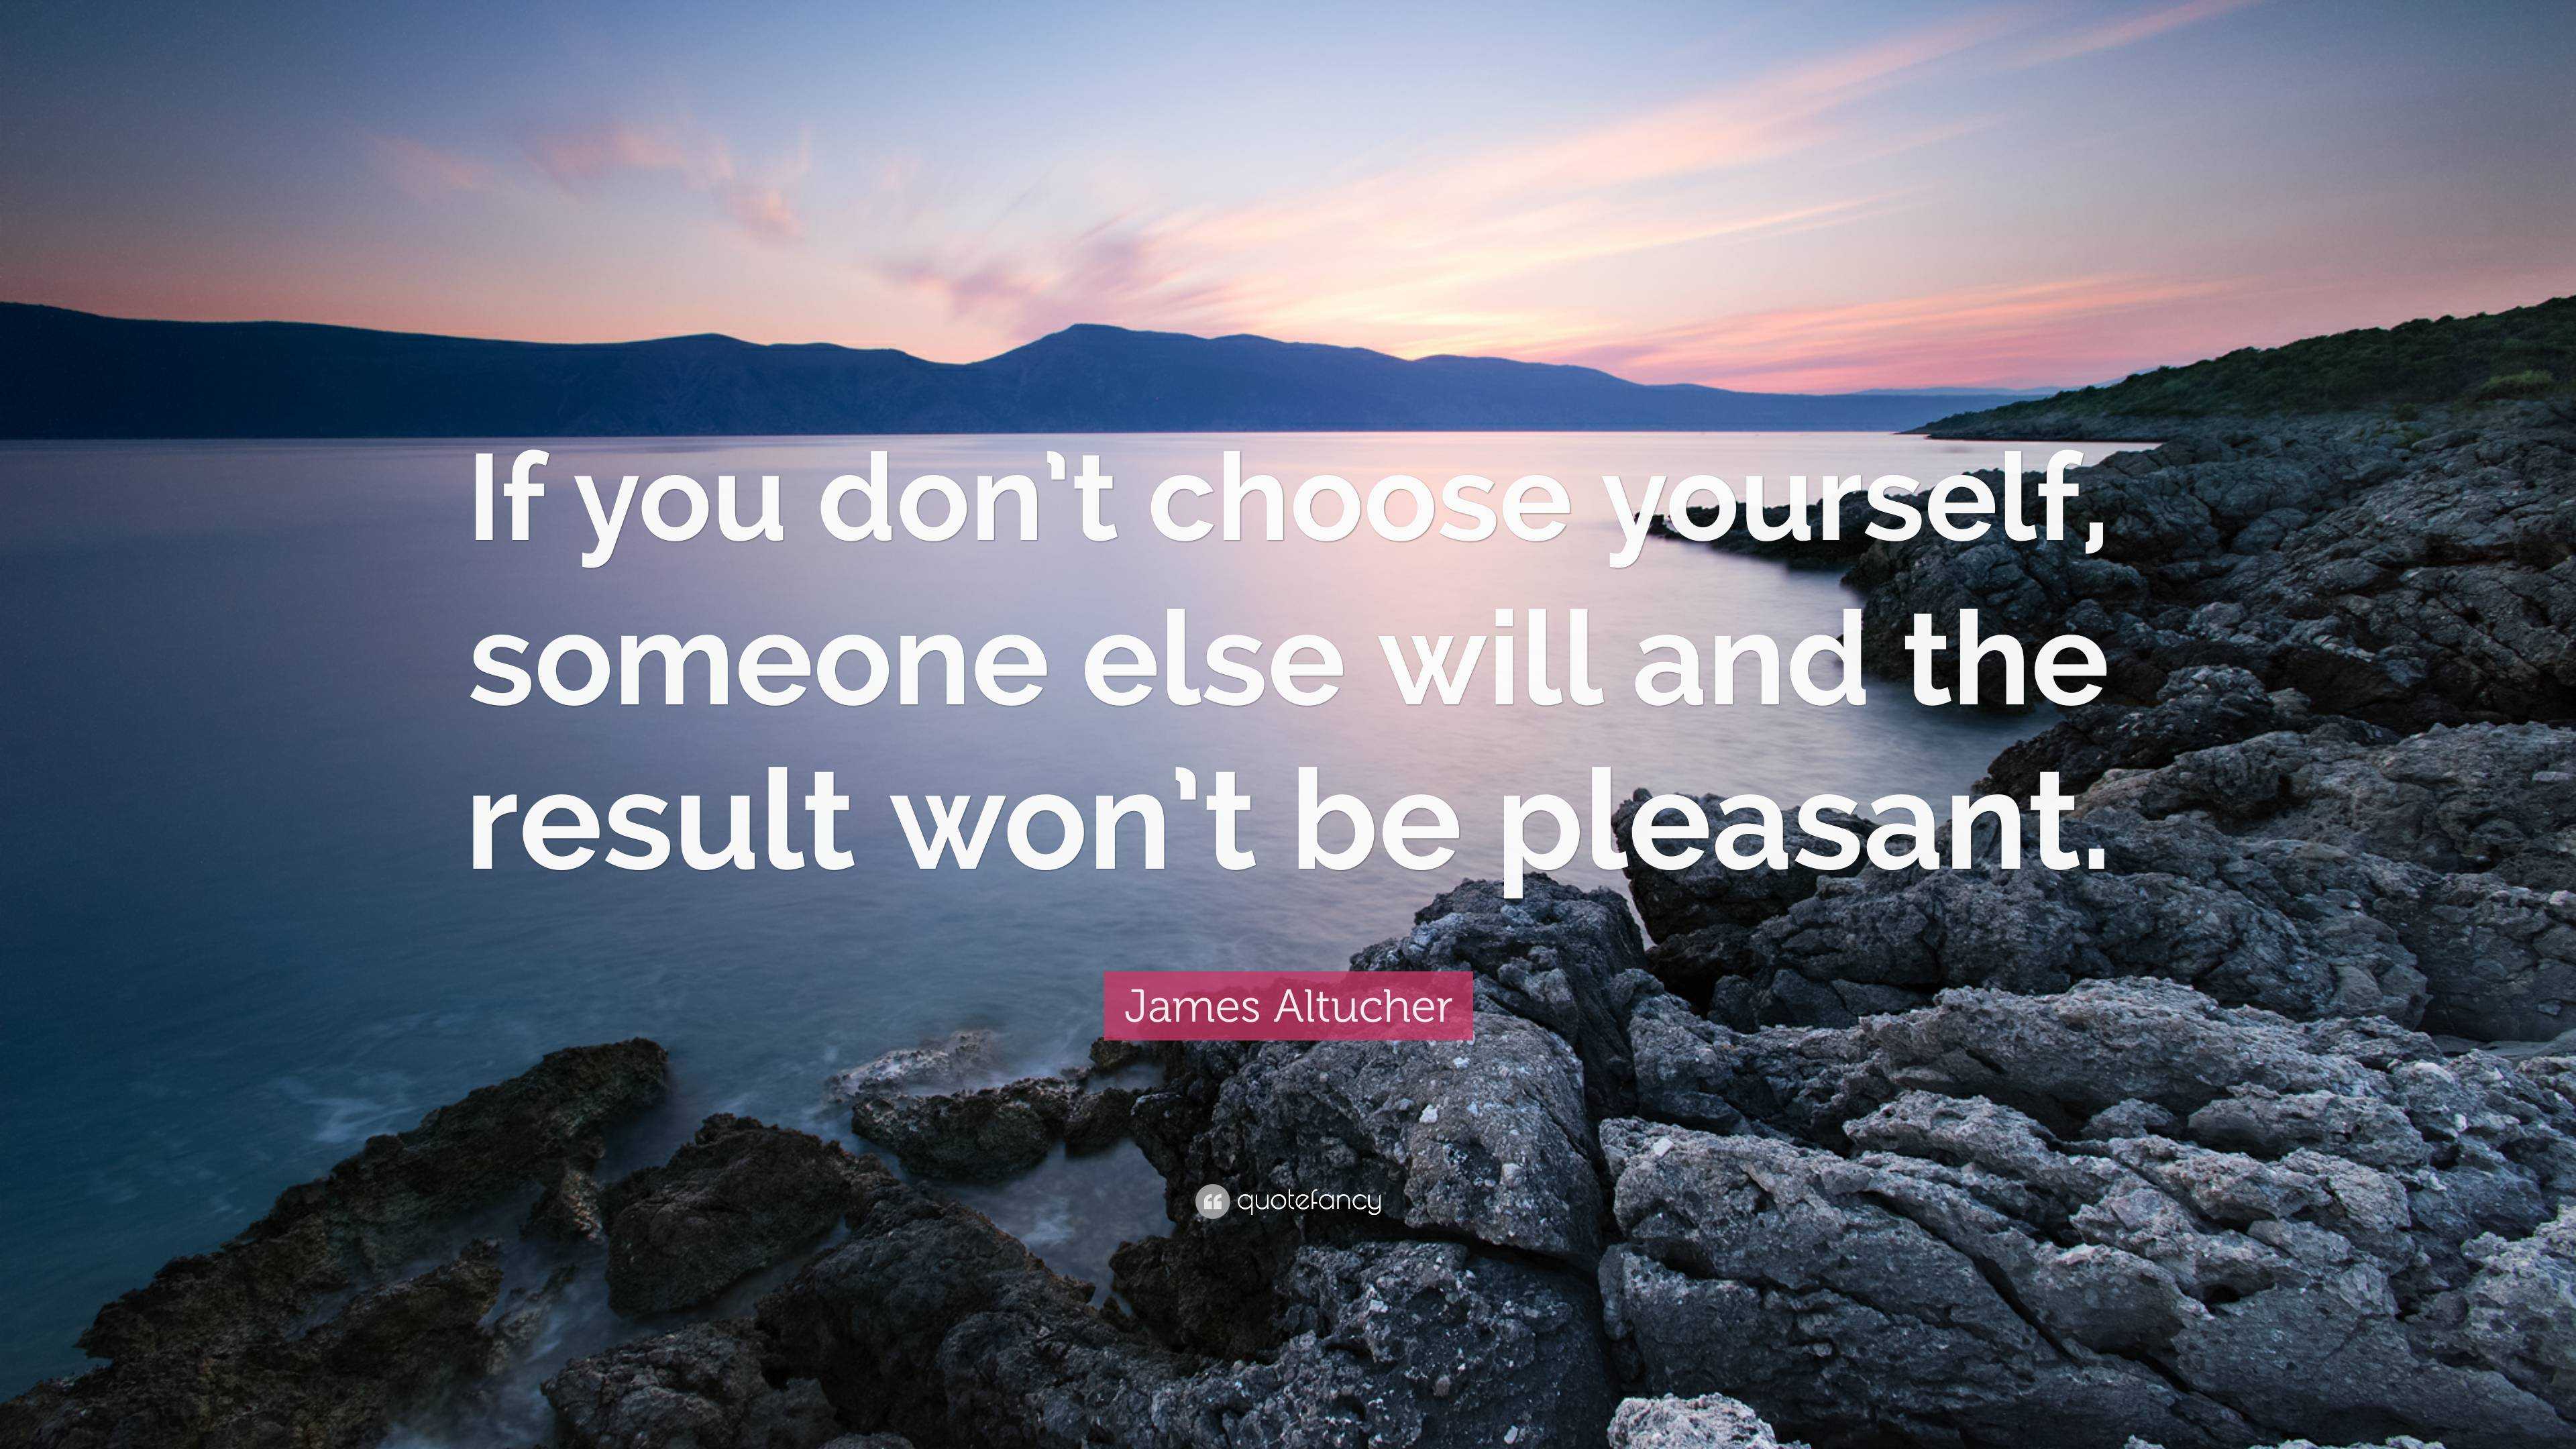 James Altucher Quote: “If you don't choose yourself, someone else will and  the result won